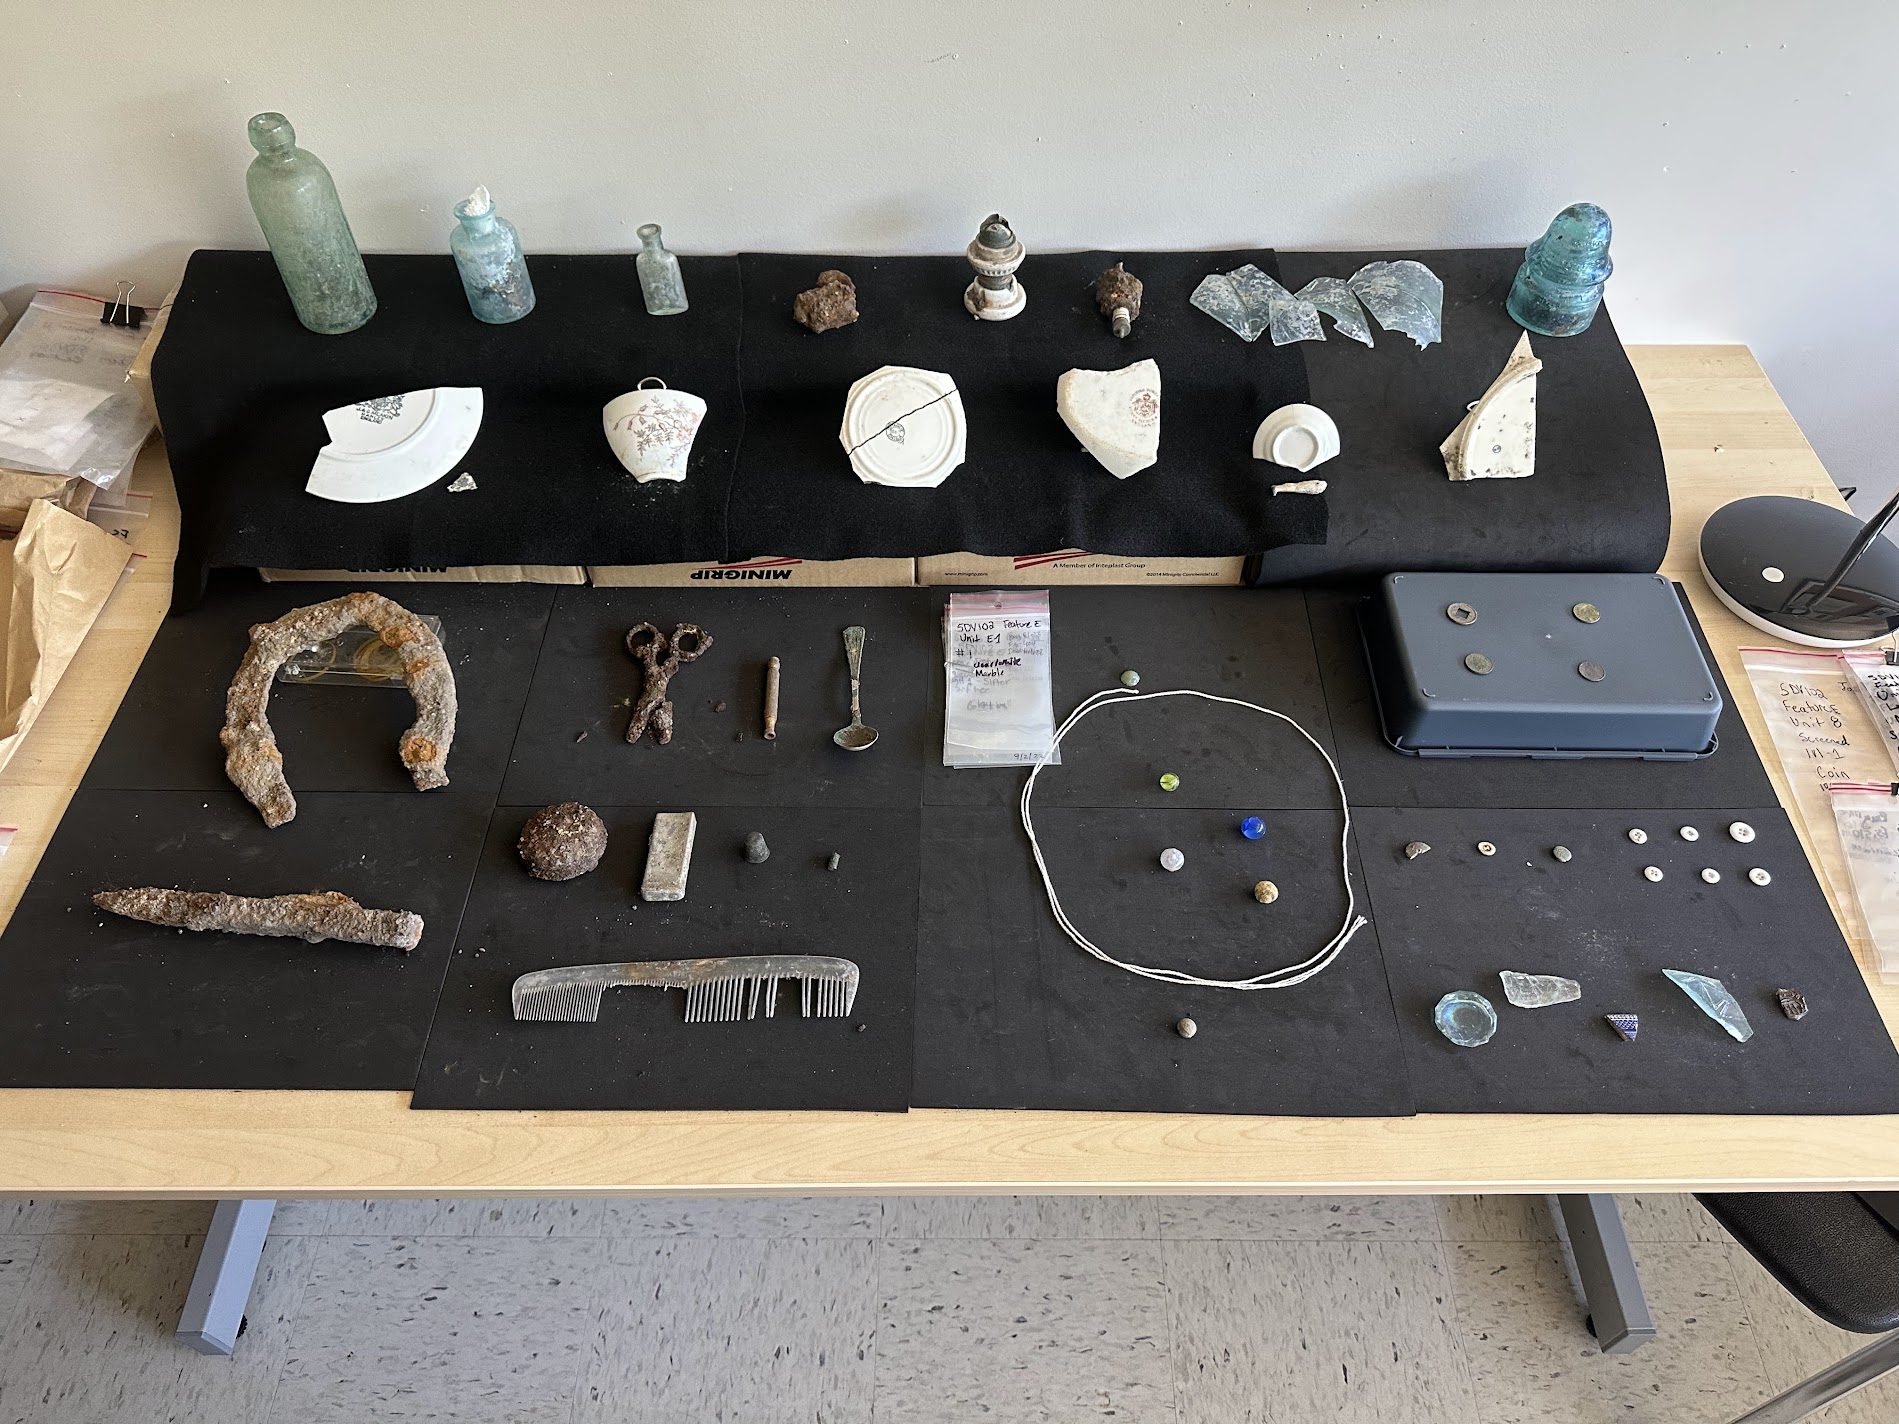 Historic artifacts excavated on the Auraria Campus.